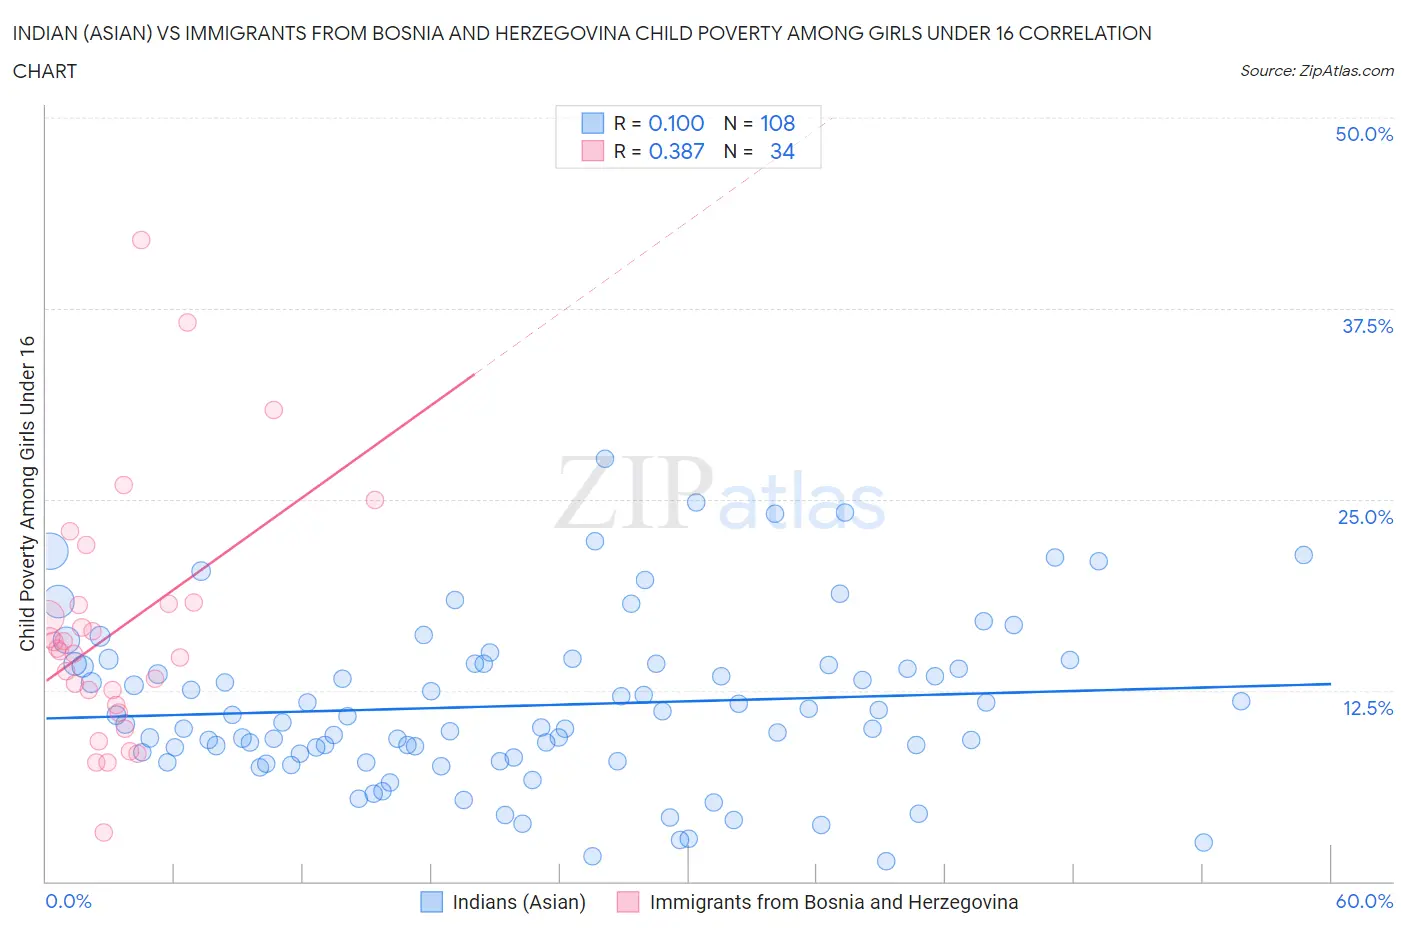 Indian (Asian) vs Immigrants from Bosnia and Herzegovina Child Poverty Among Girls Under 16